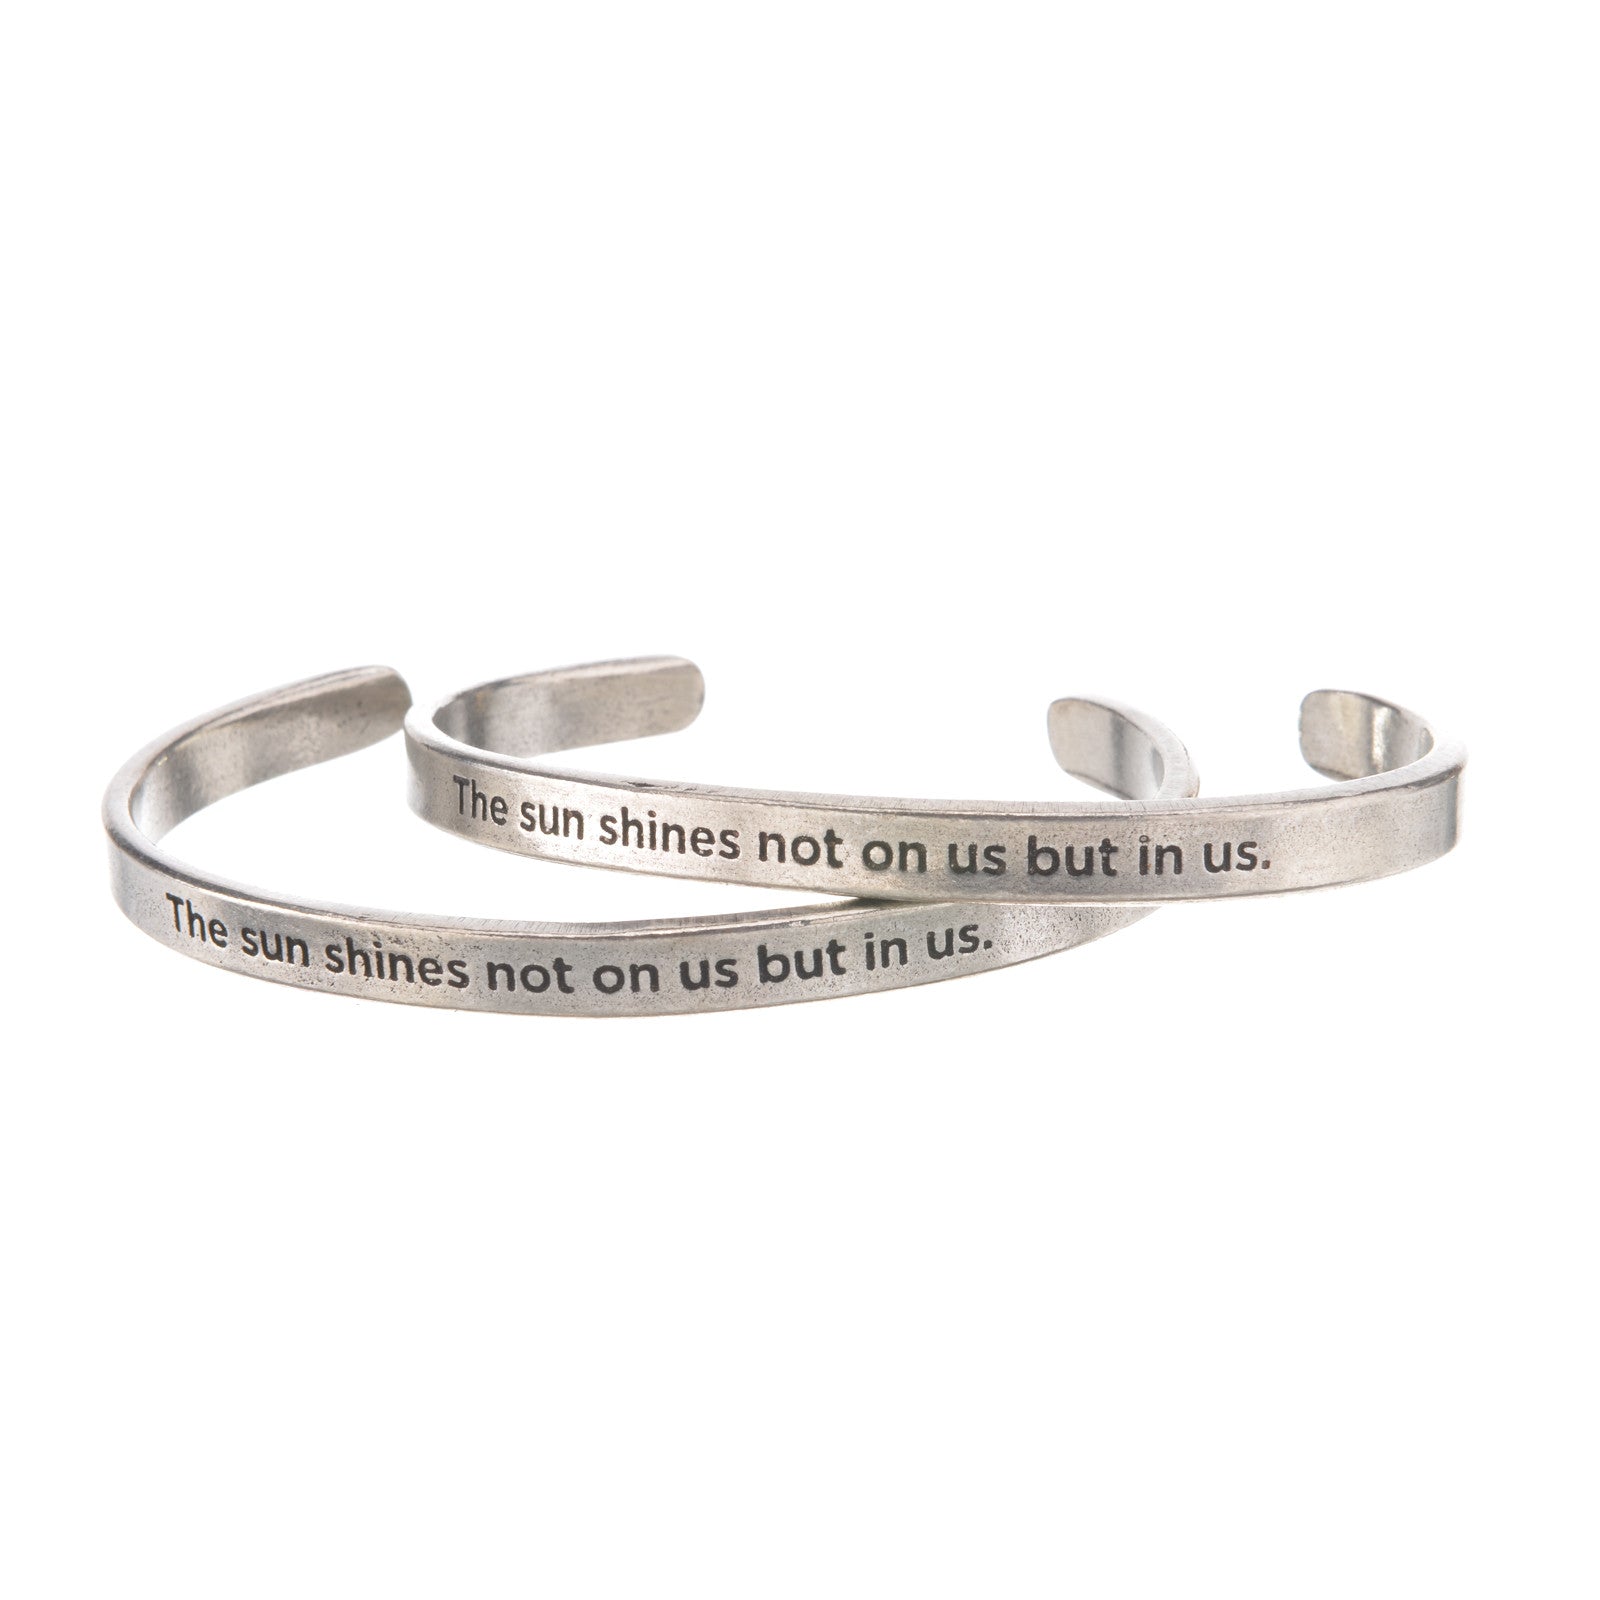 The Sun Shines Not On Us But In Us John Muir Quotable Cuff Bracelets on each other